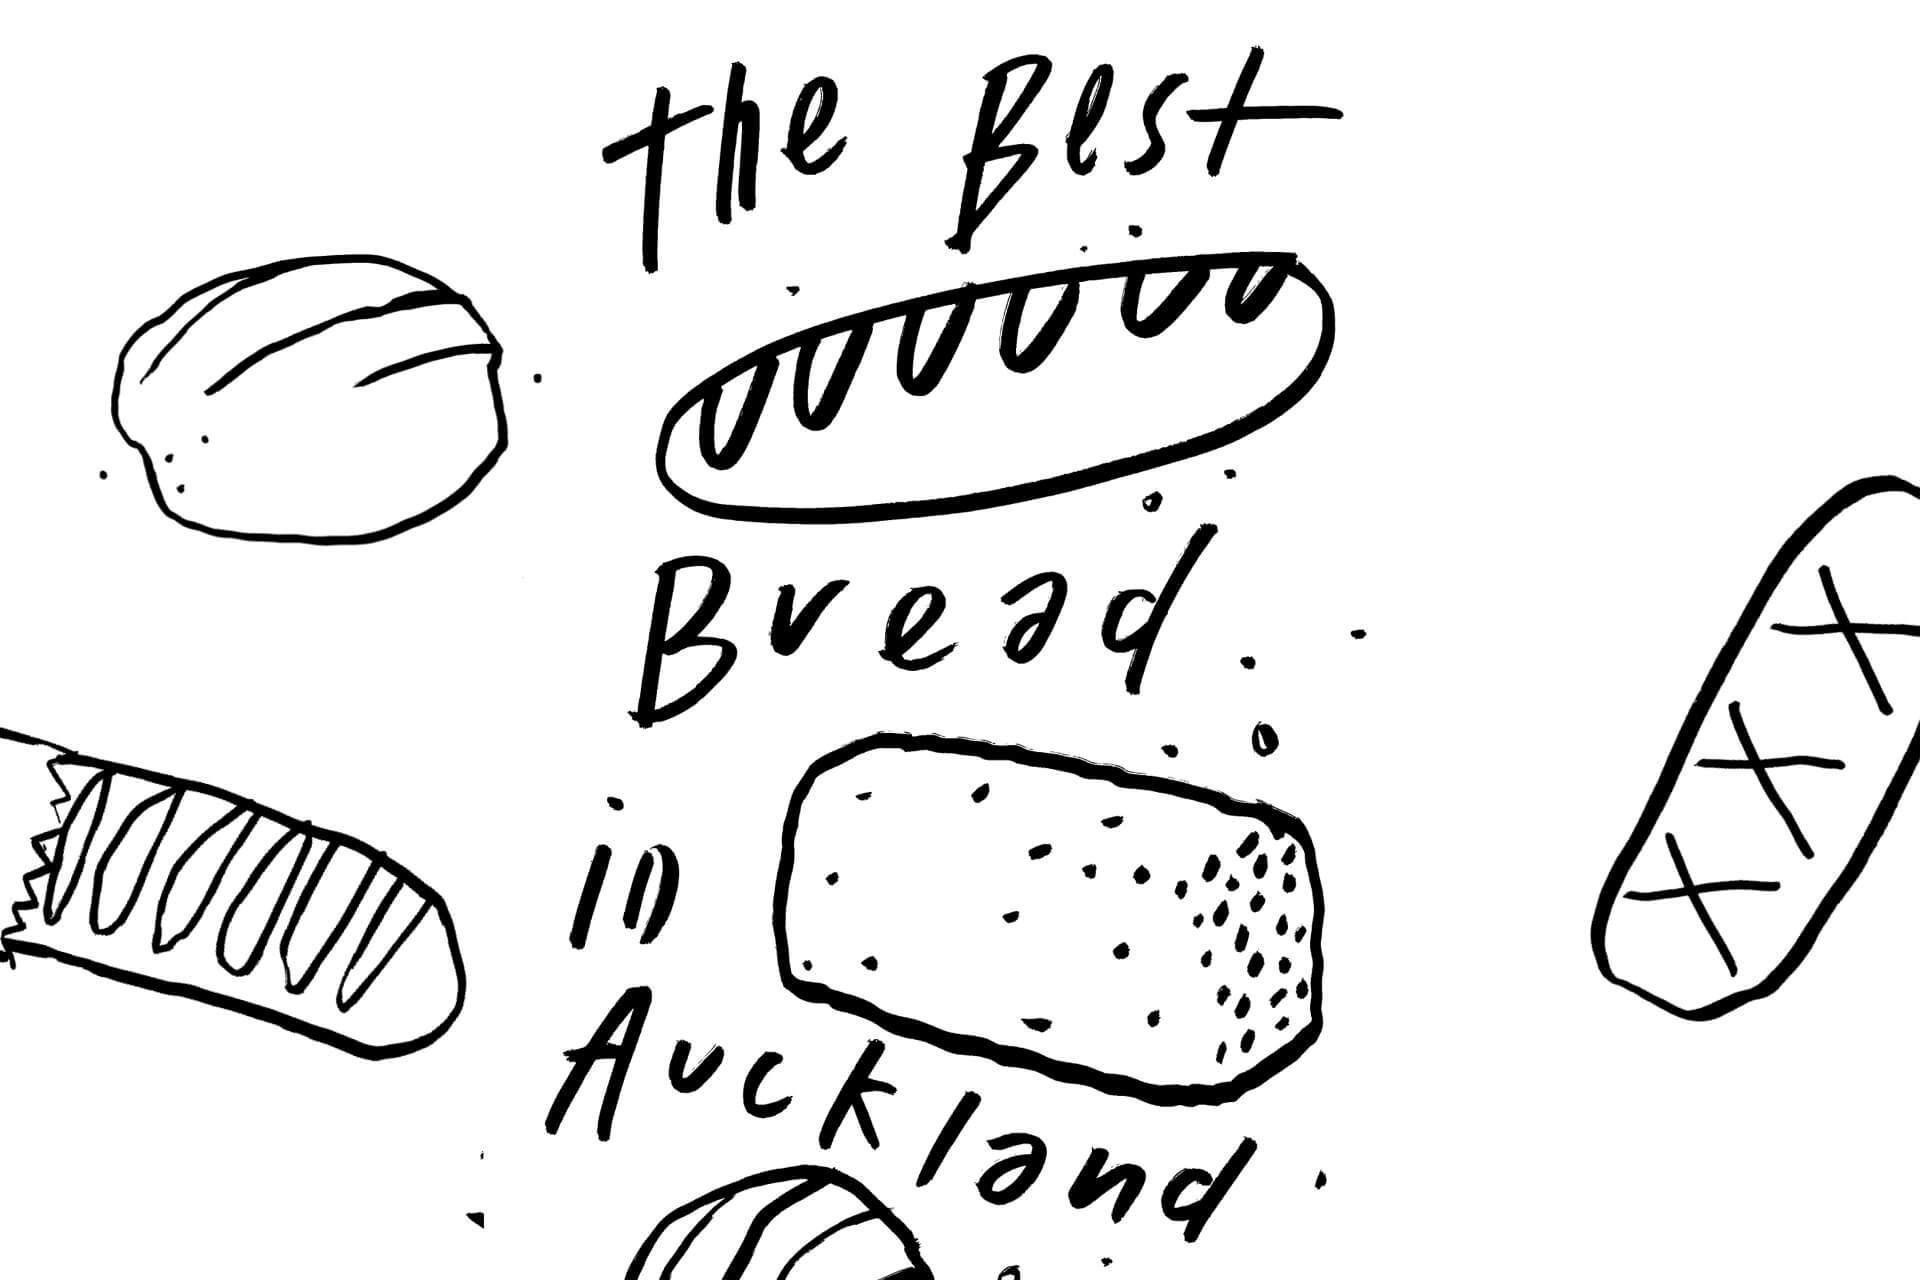 The Best Bread in Auckland